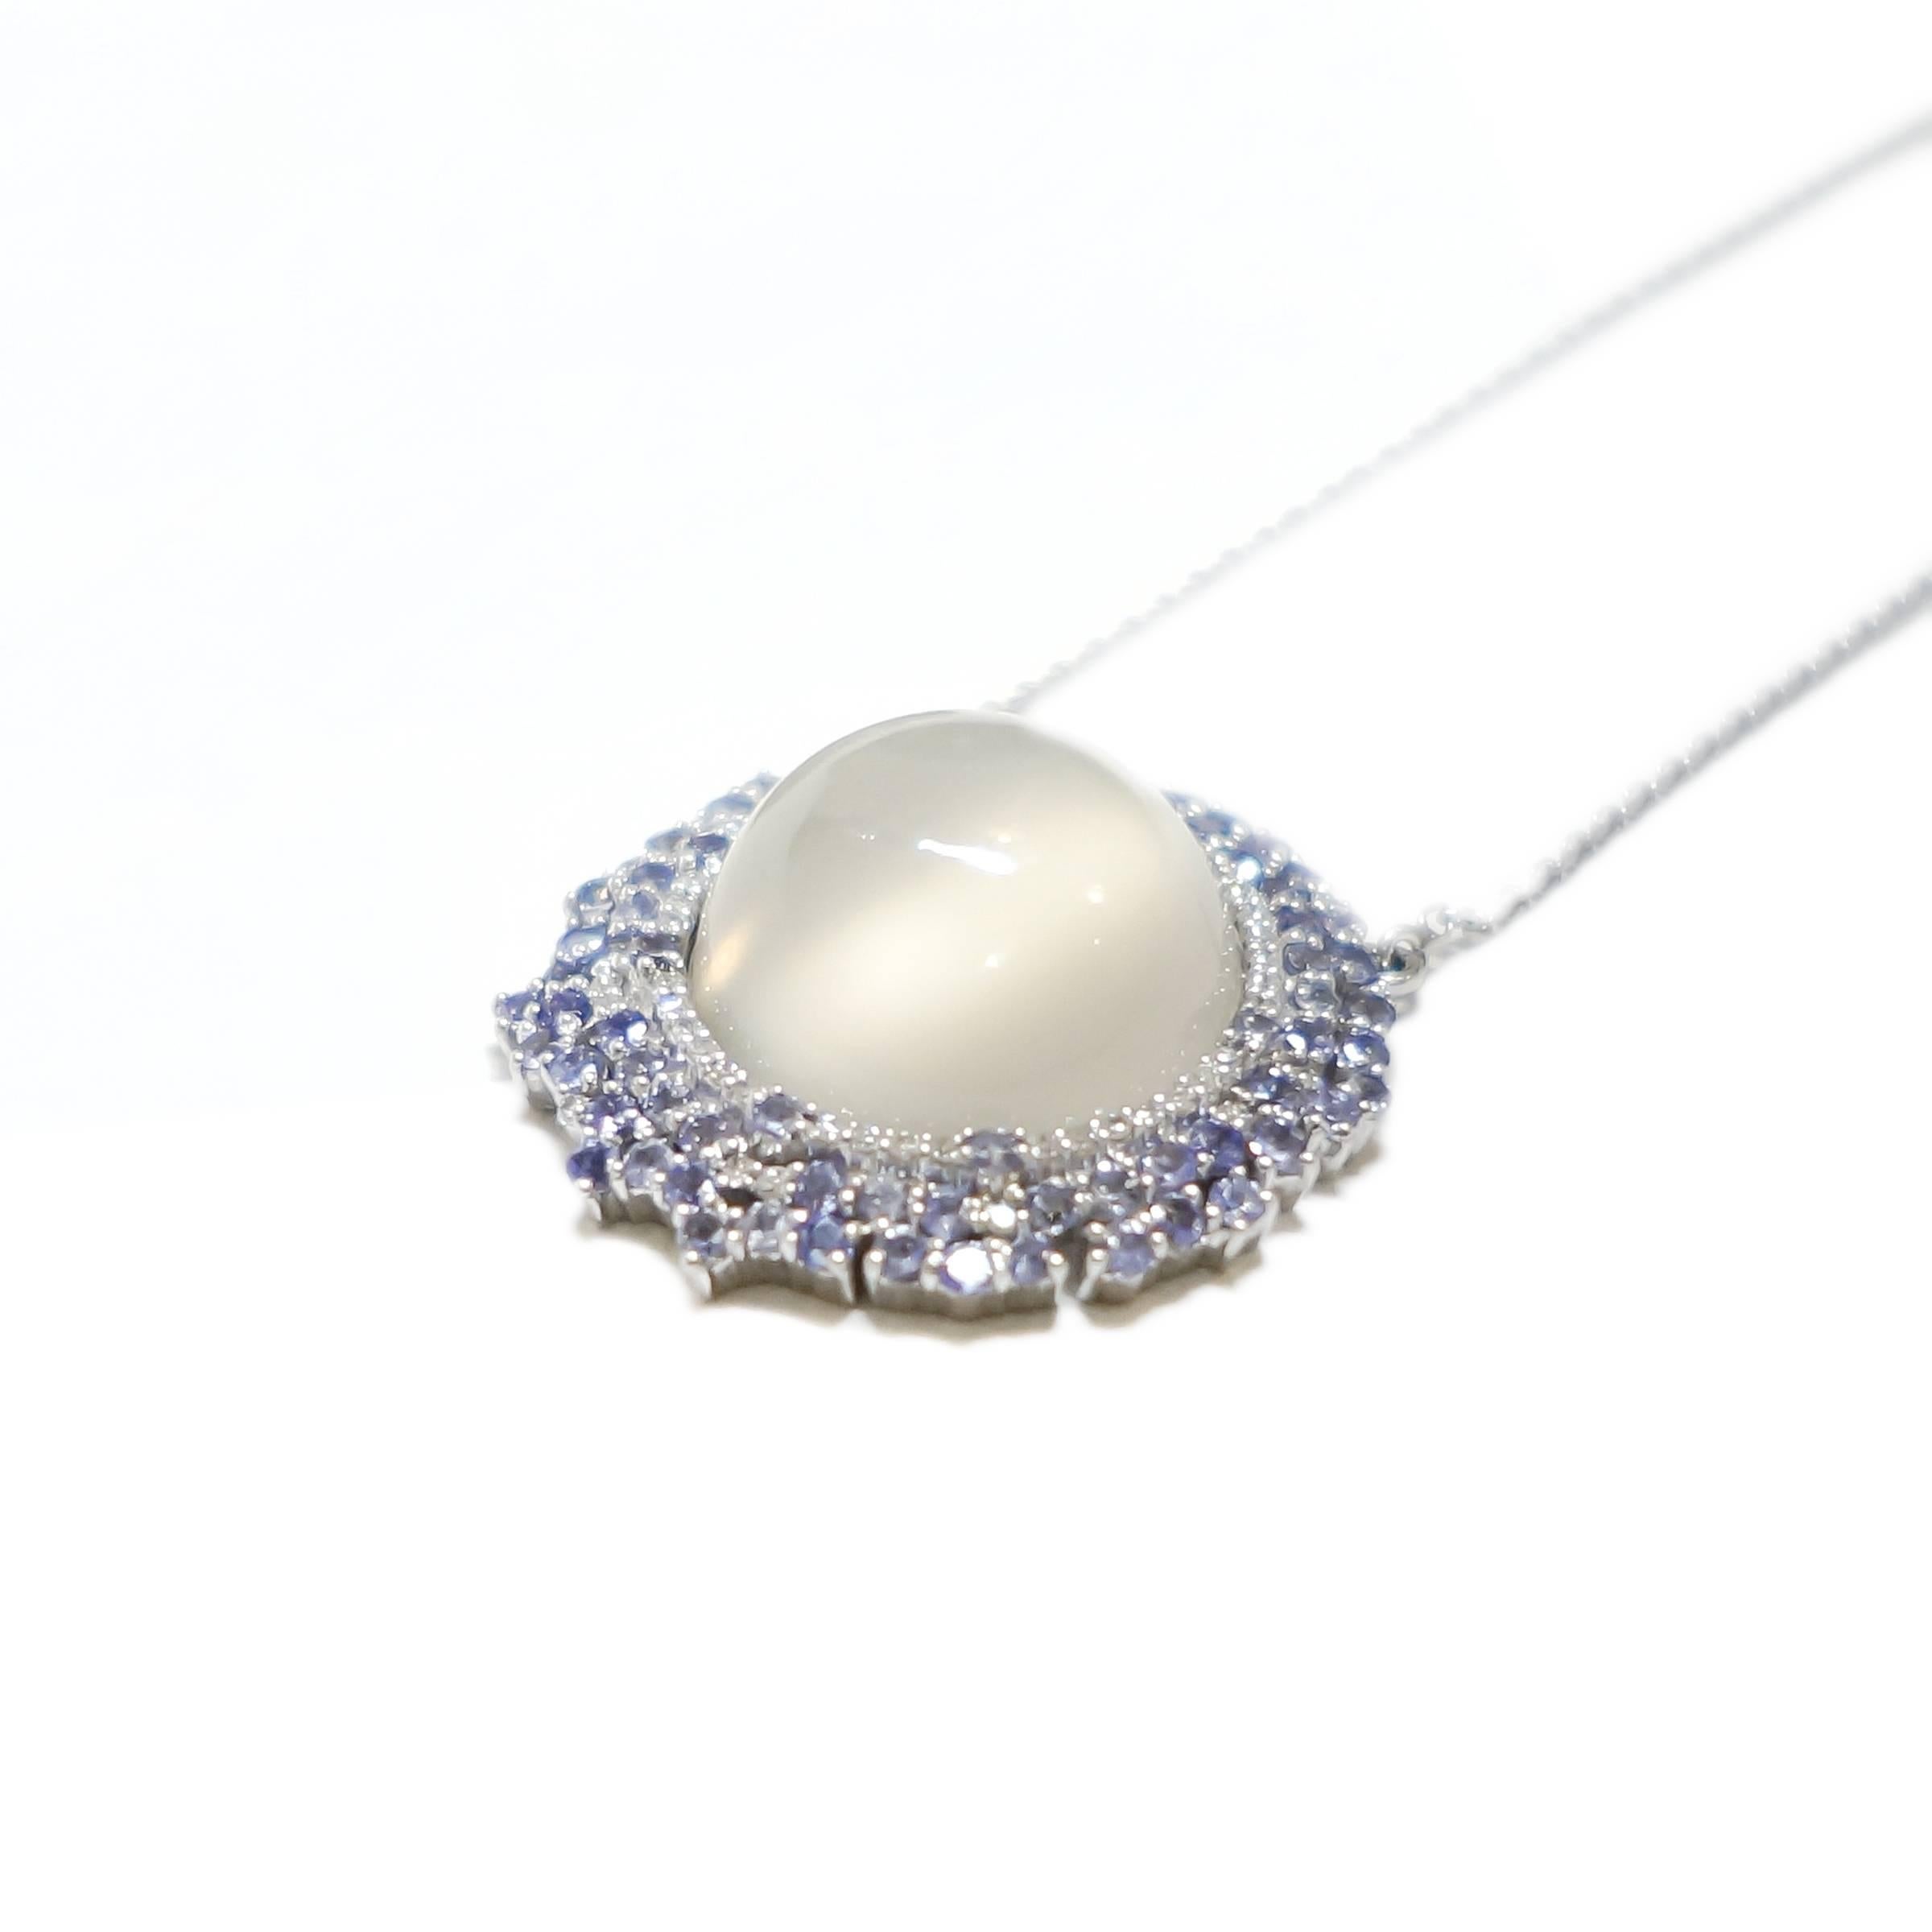 Uniquely mixing bold shapes with stunning gemstones, Ri Noor's Starburst Moonstone Tanzanite and Diamond Necklace is a captivating piece of jewelry with an ethereal quality. The necklace is anchored by a semispherical moonstone that glistens in the